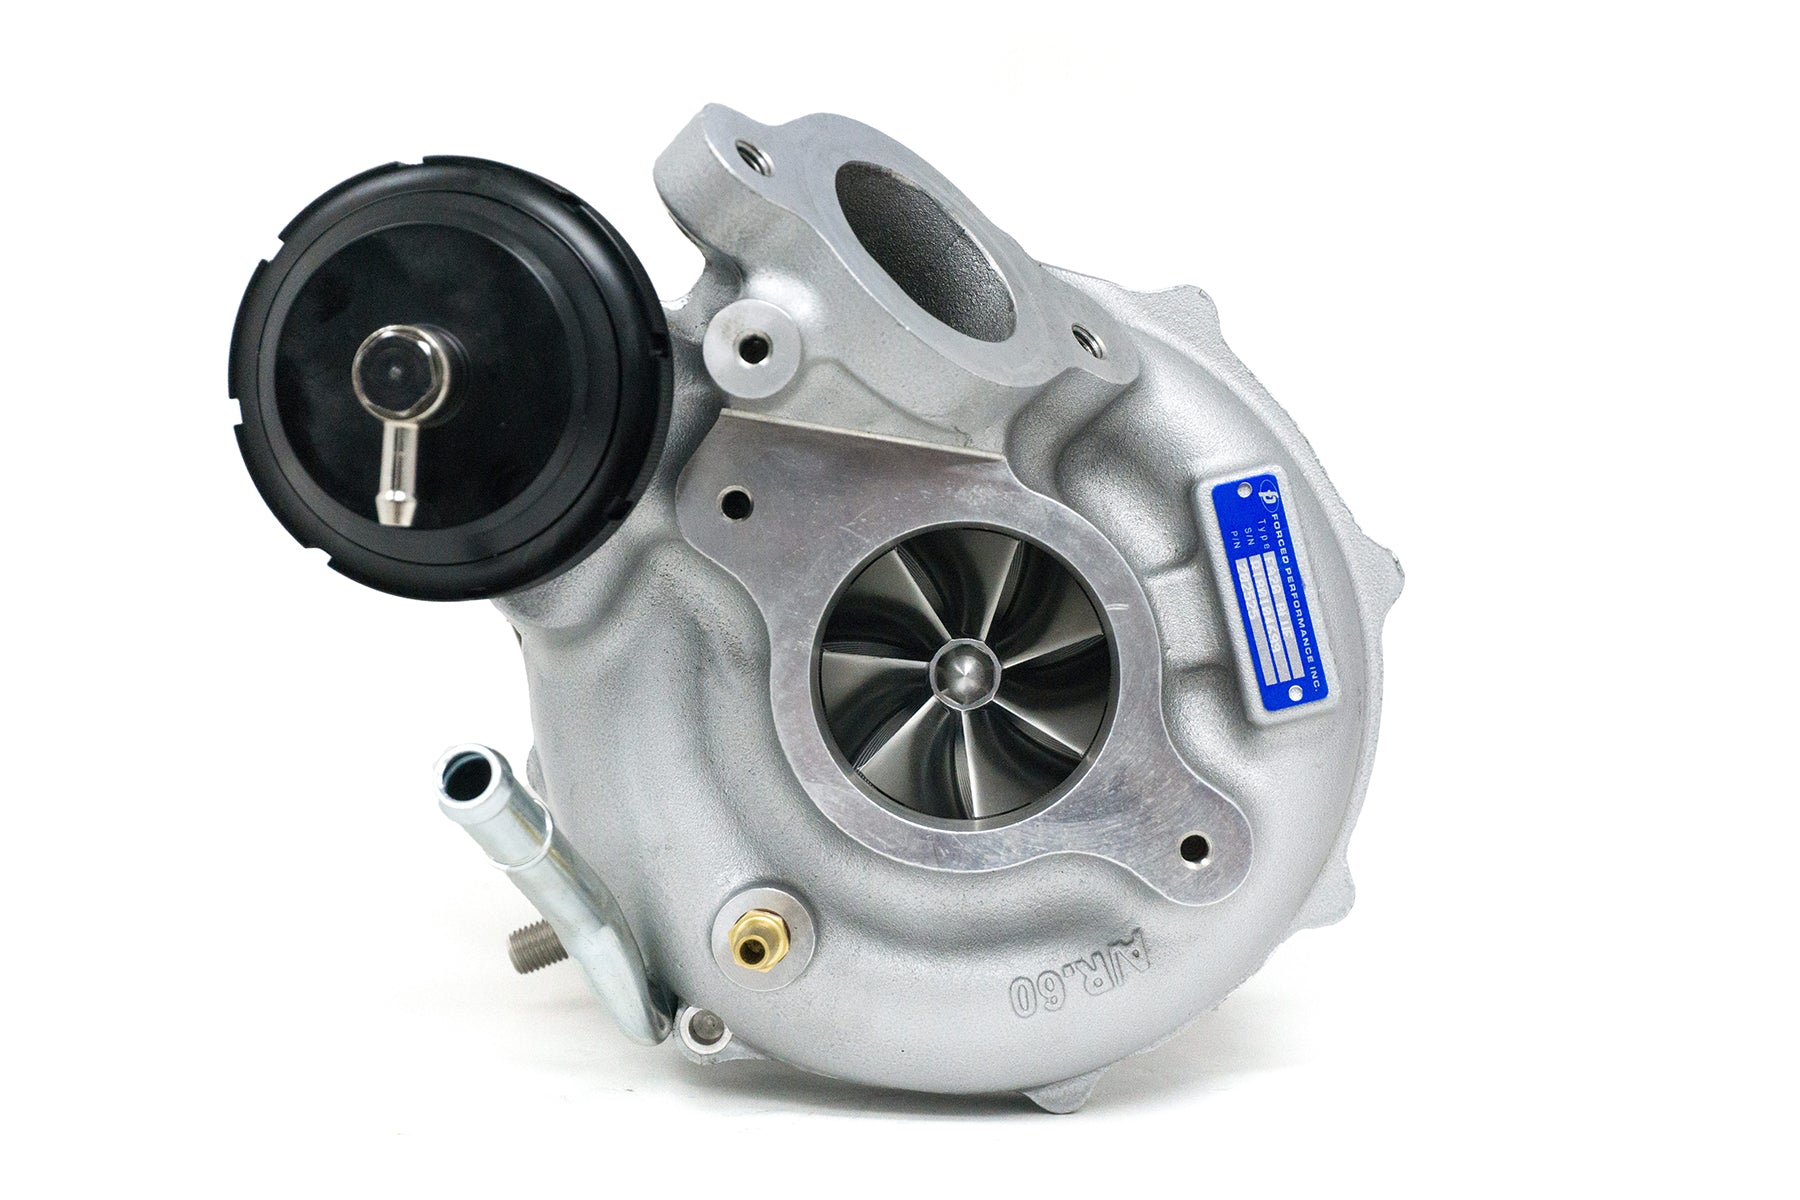 Forced Performance FP BLUE Turbocharger with TiAL MVI Internal Wastegate